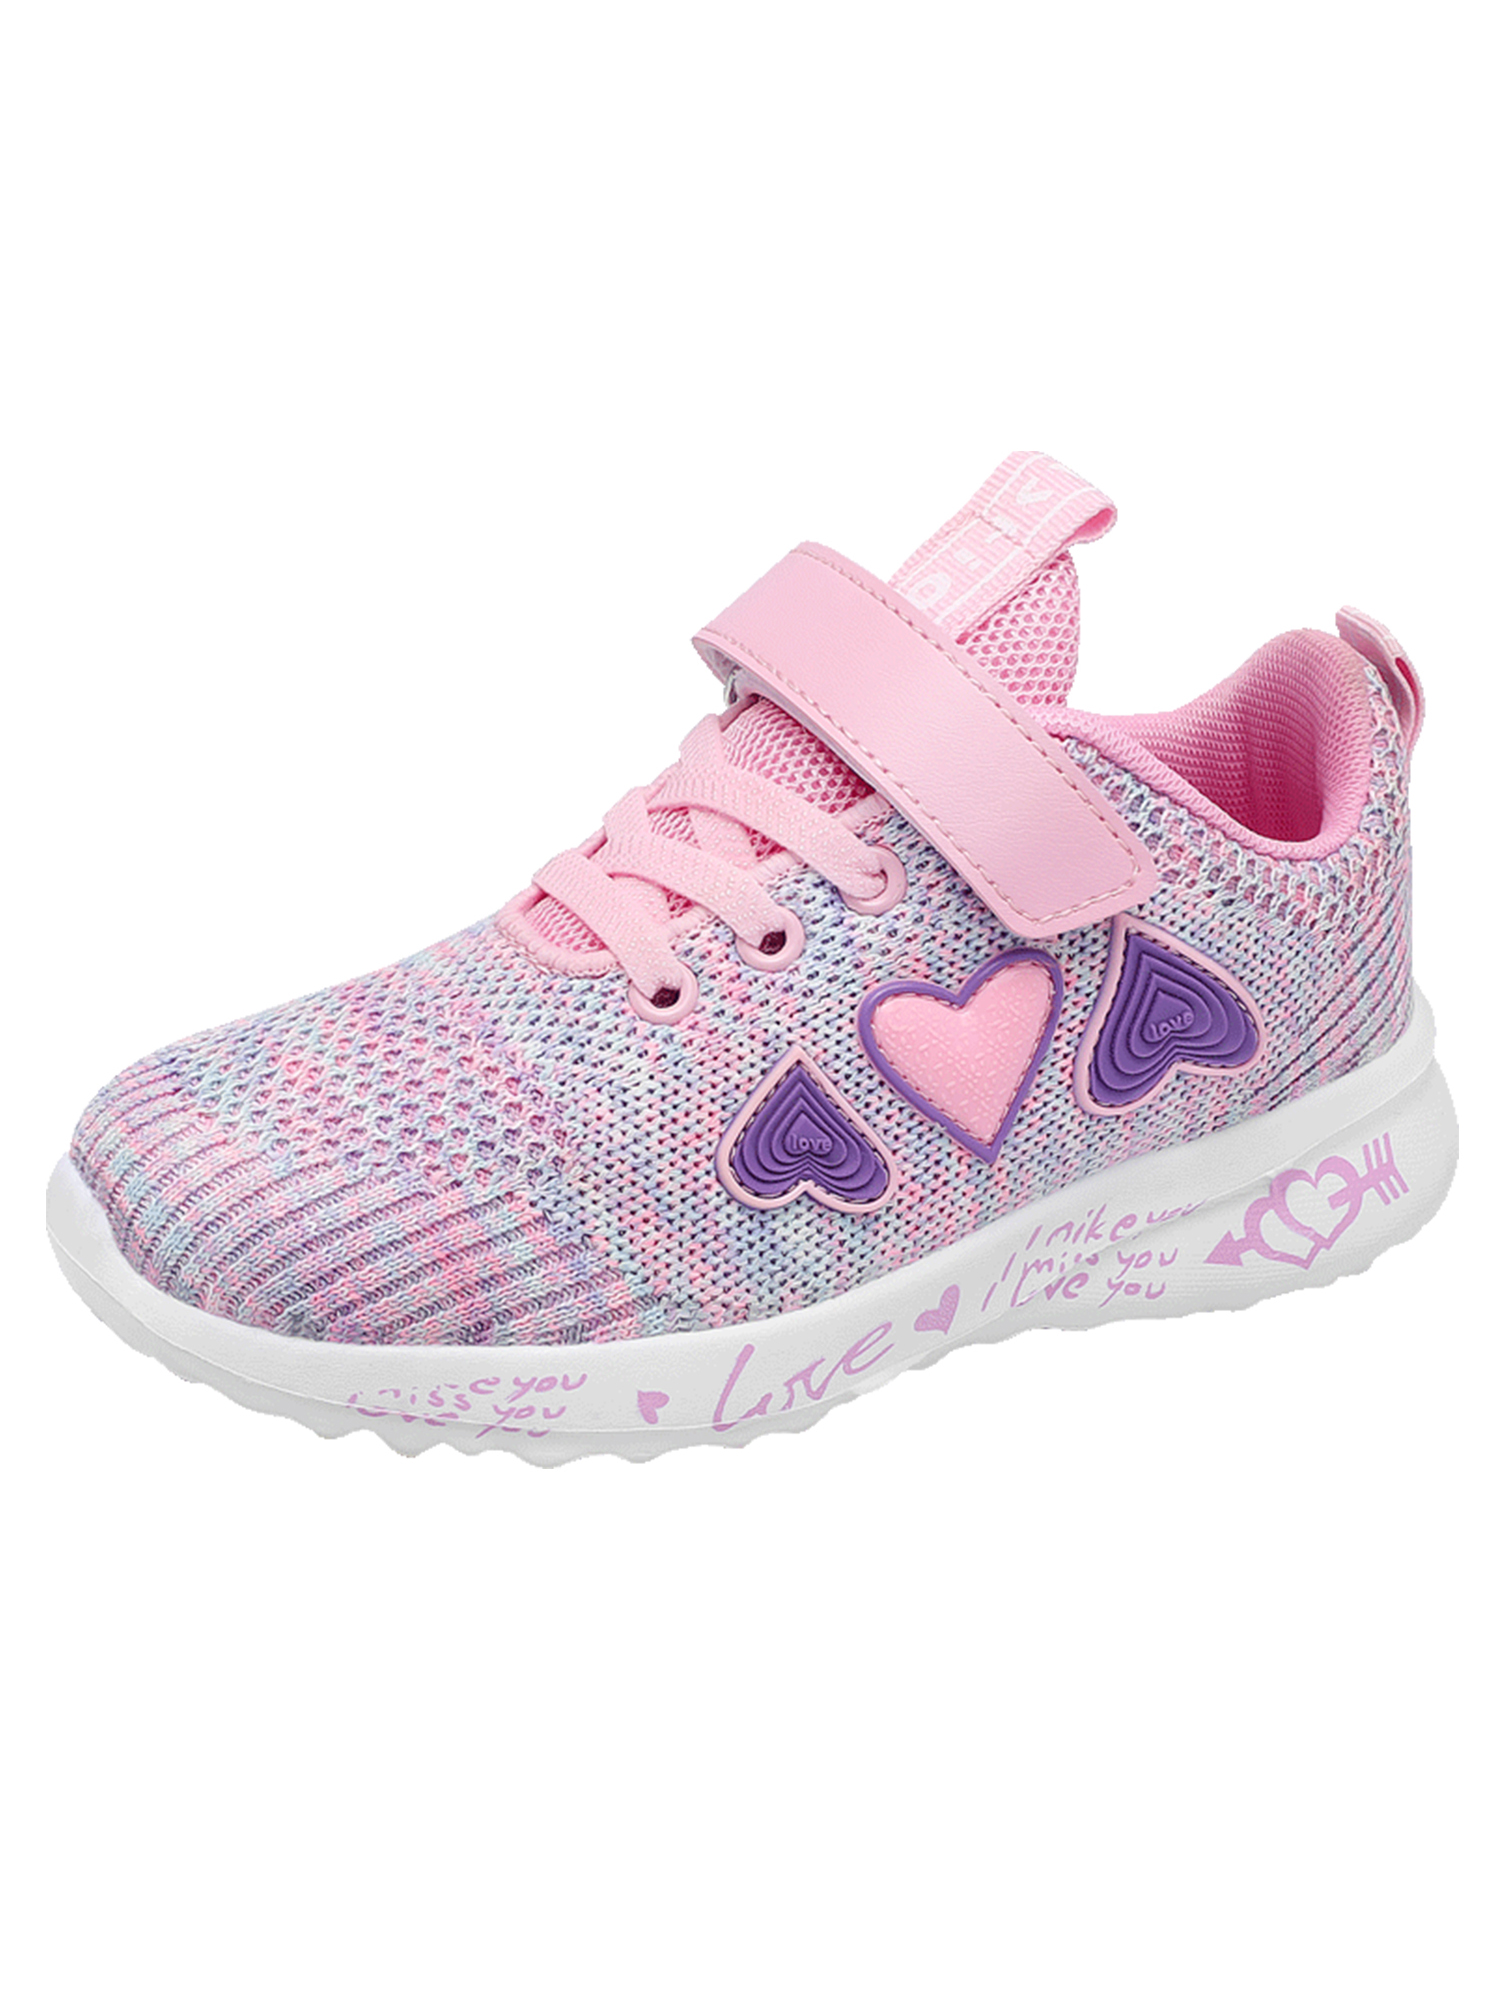 Tanleewa Lovely Girls Sports Shoes Kids Breathable Sneakers Lightweight Casual Shoe Size 10 - image 4 of 7